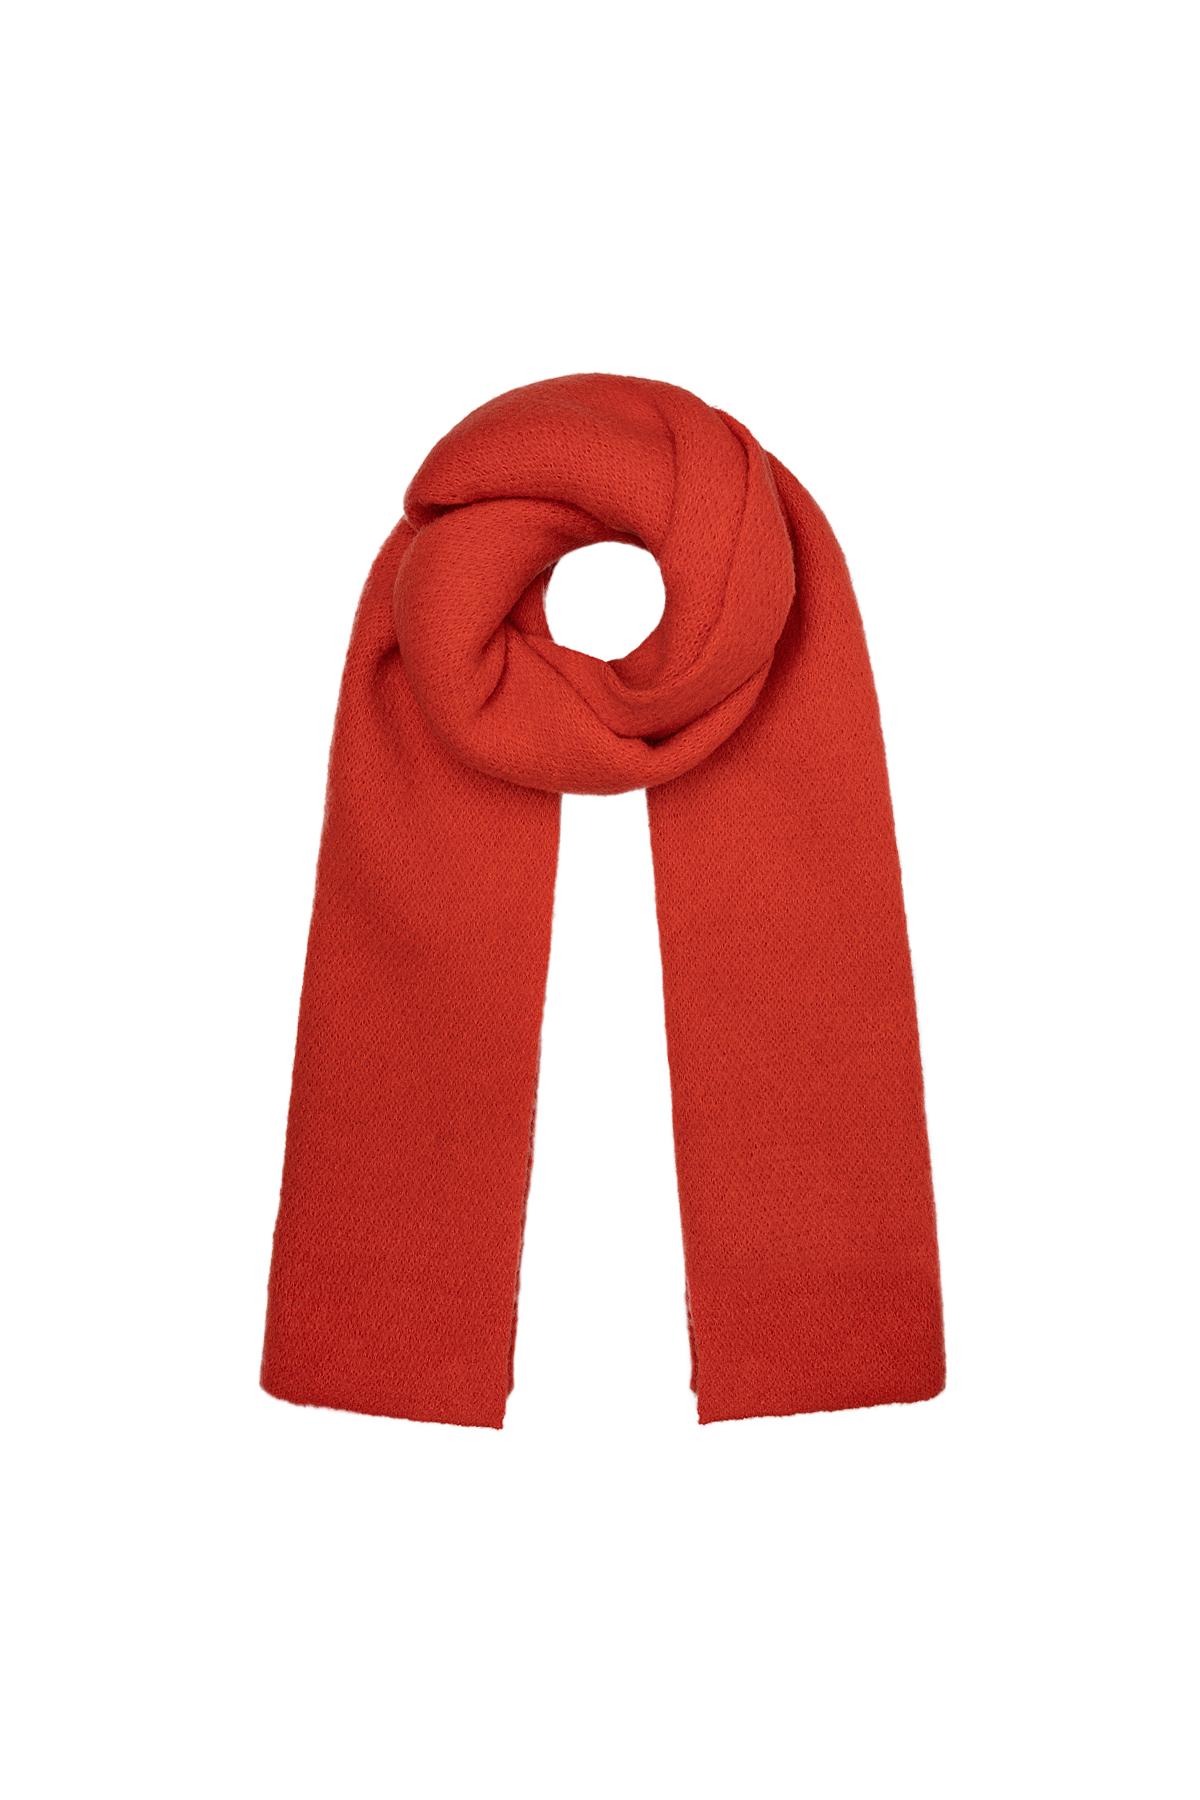 Soft winter scarf solid red Polyester 